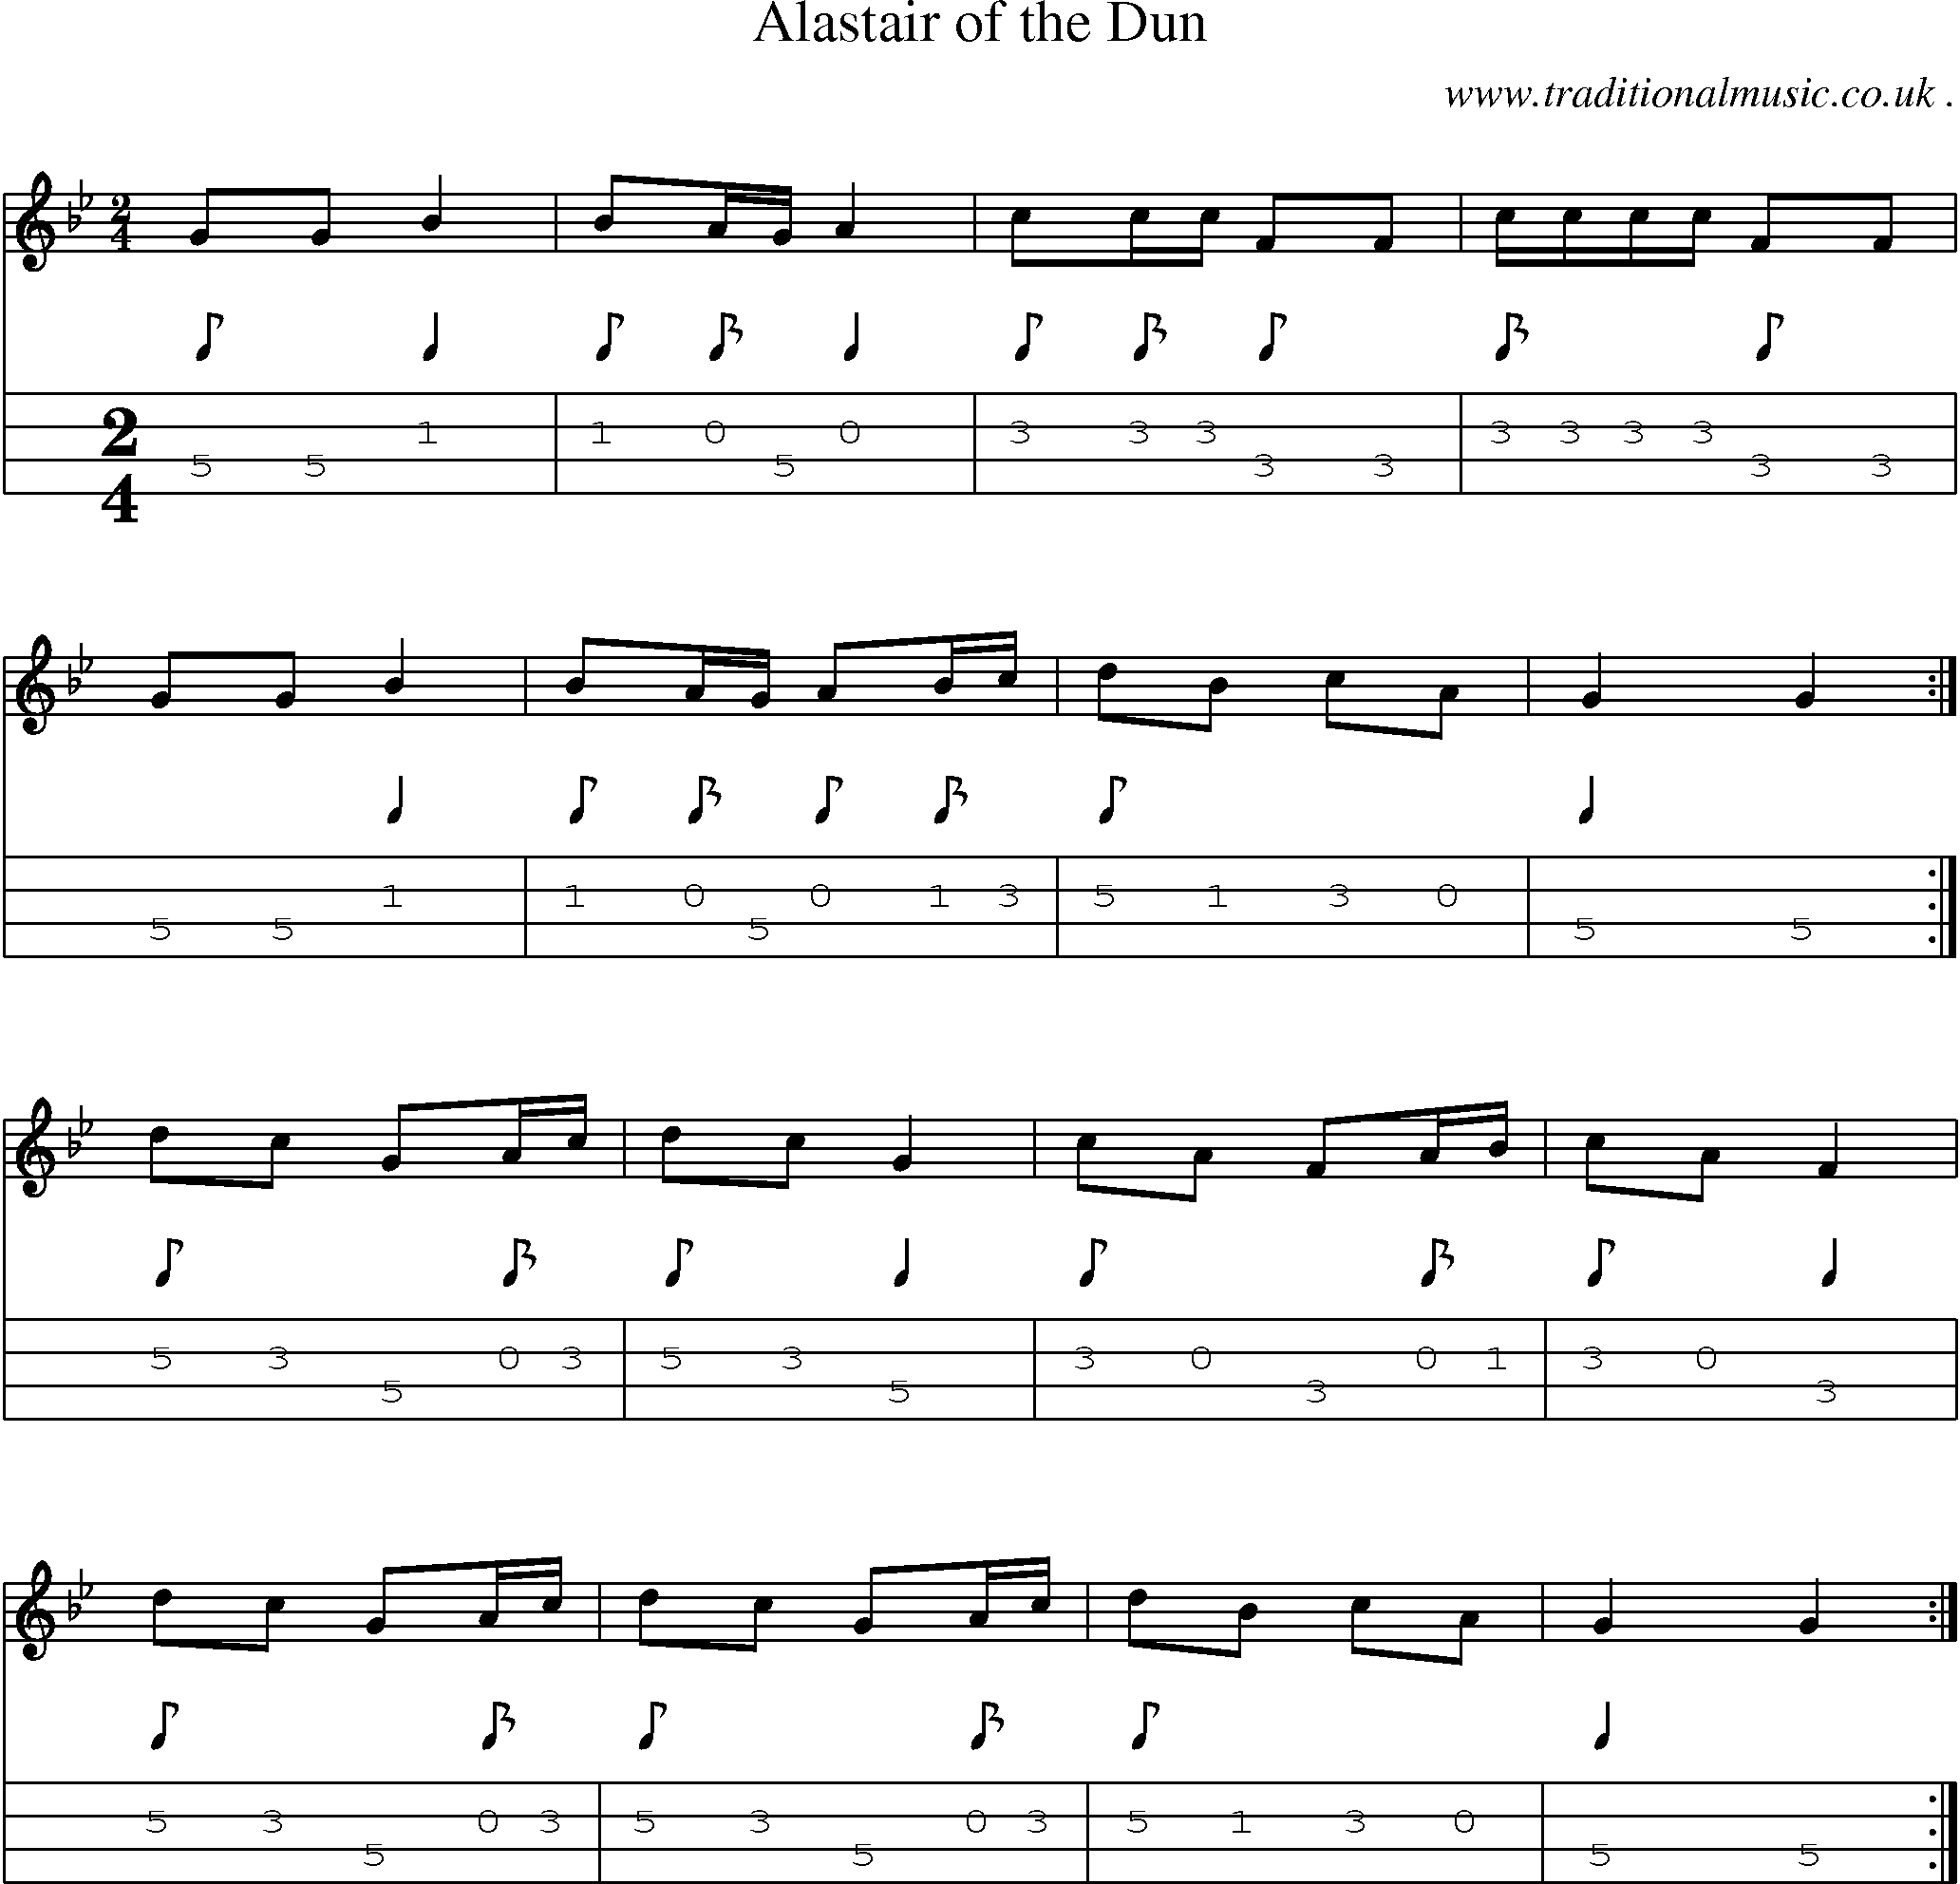 Sheet-music  score, Chords and Mandolin Tabs for Alastair Of The Dun